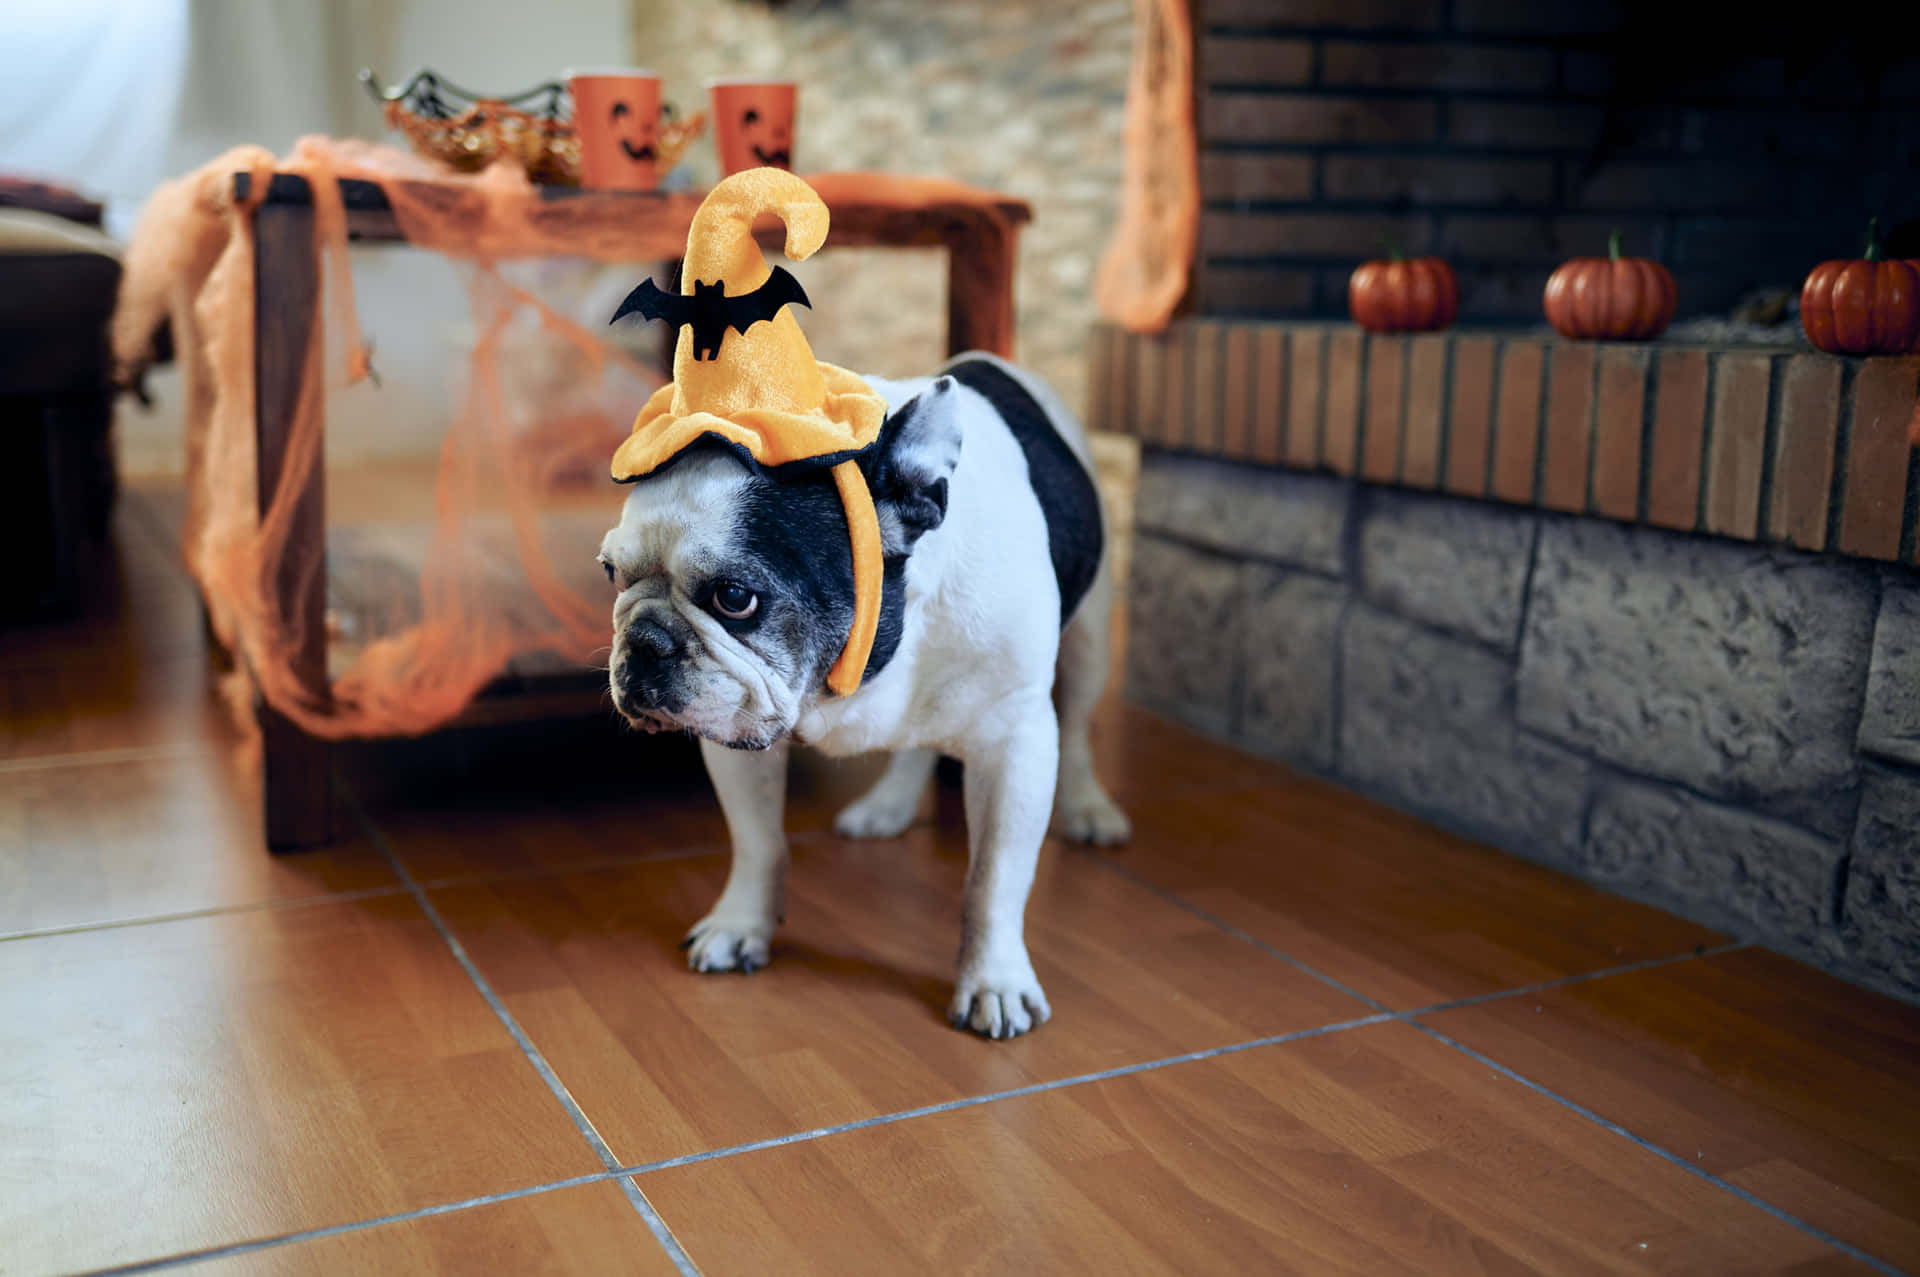 Make Halloween extra special with festive pet costumes. Wallpaper